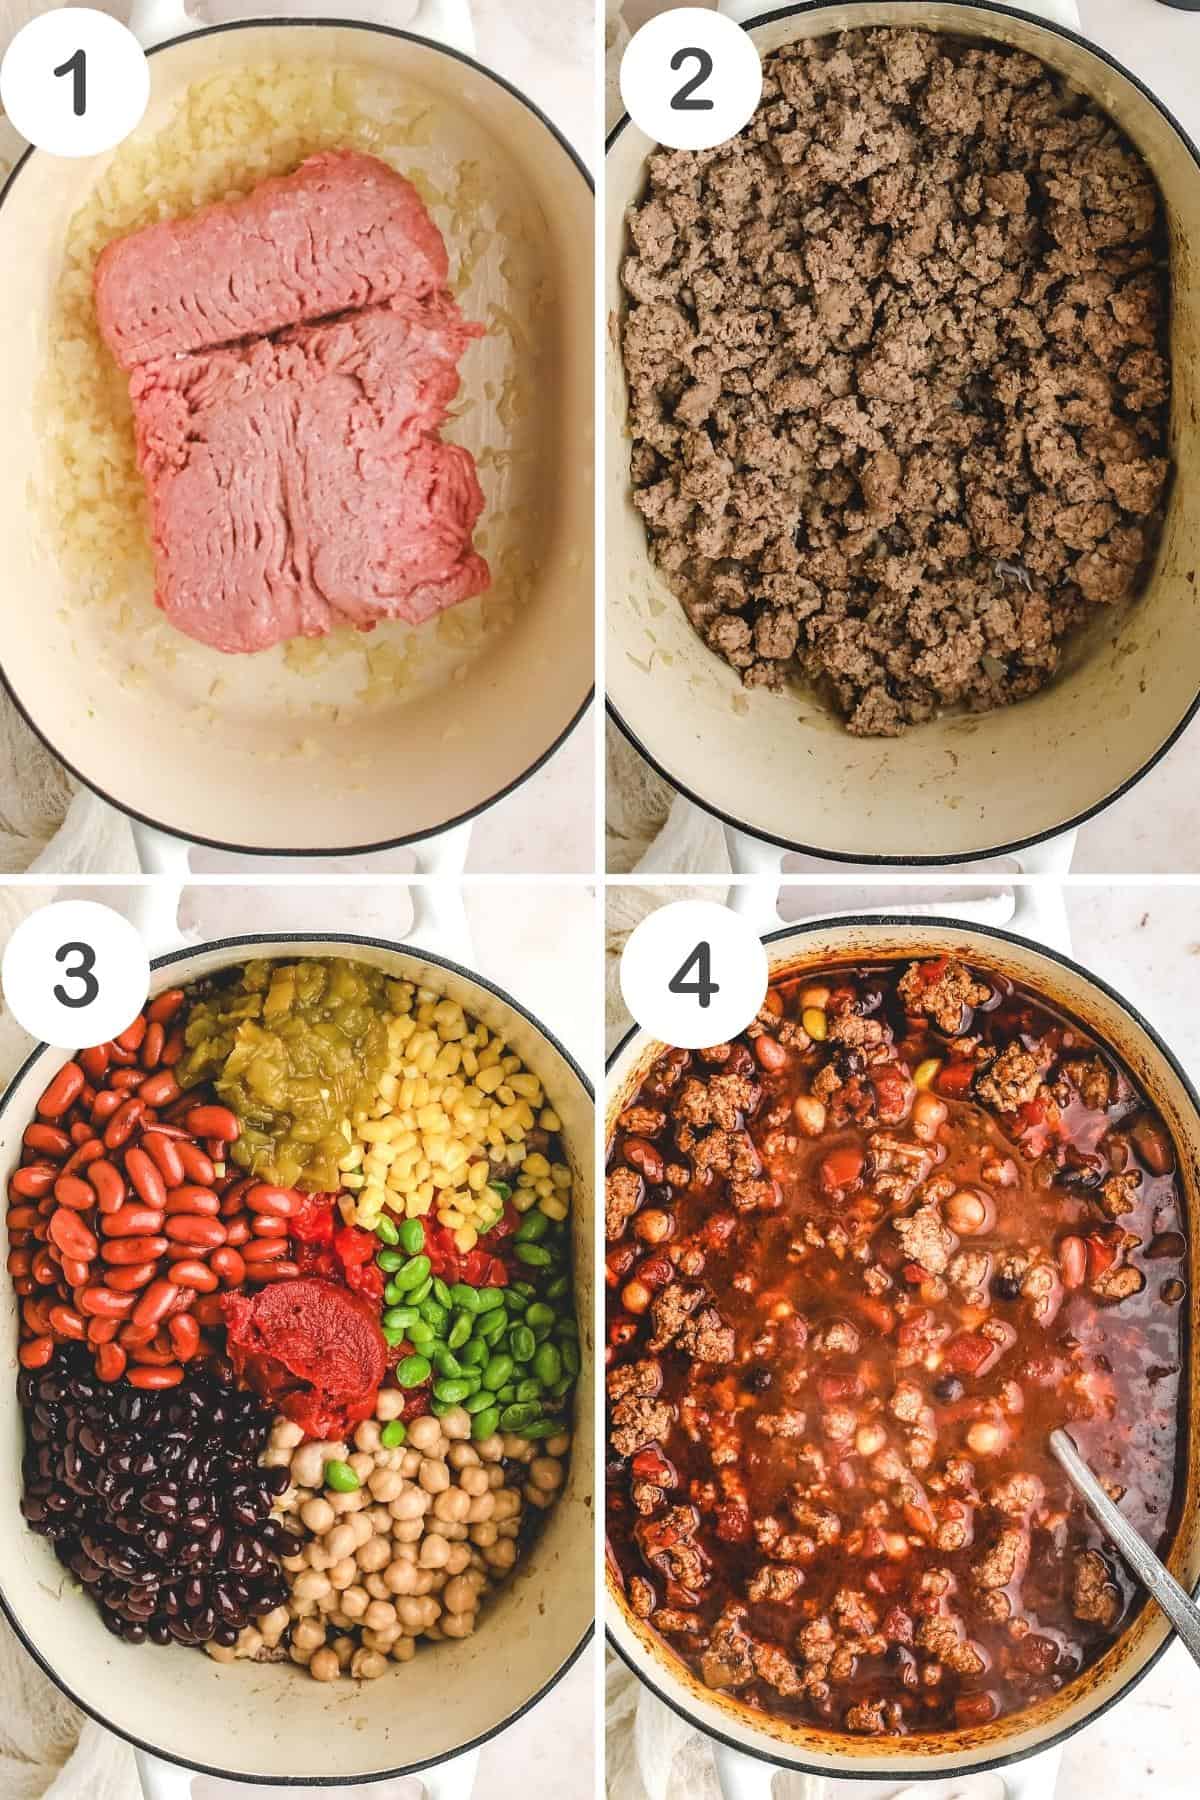 Step by step photos of the Turkey Chili